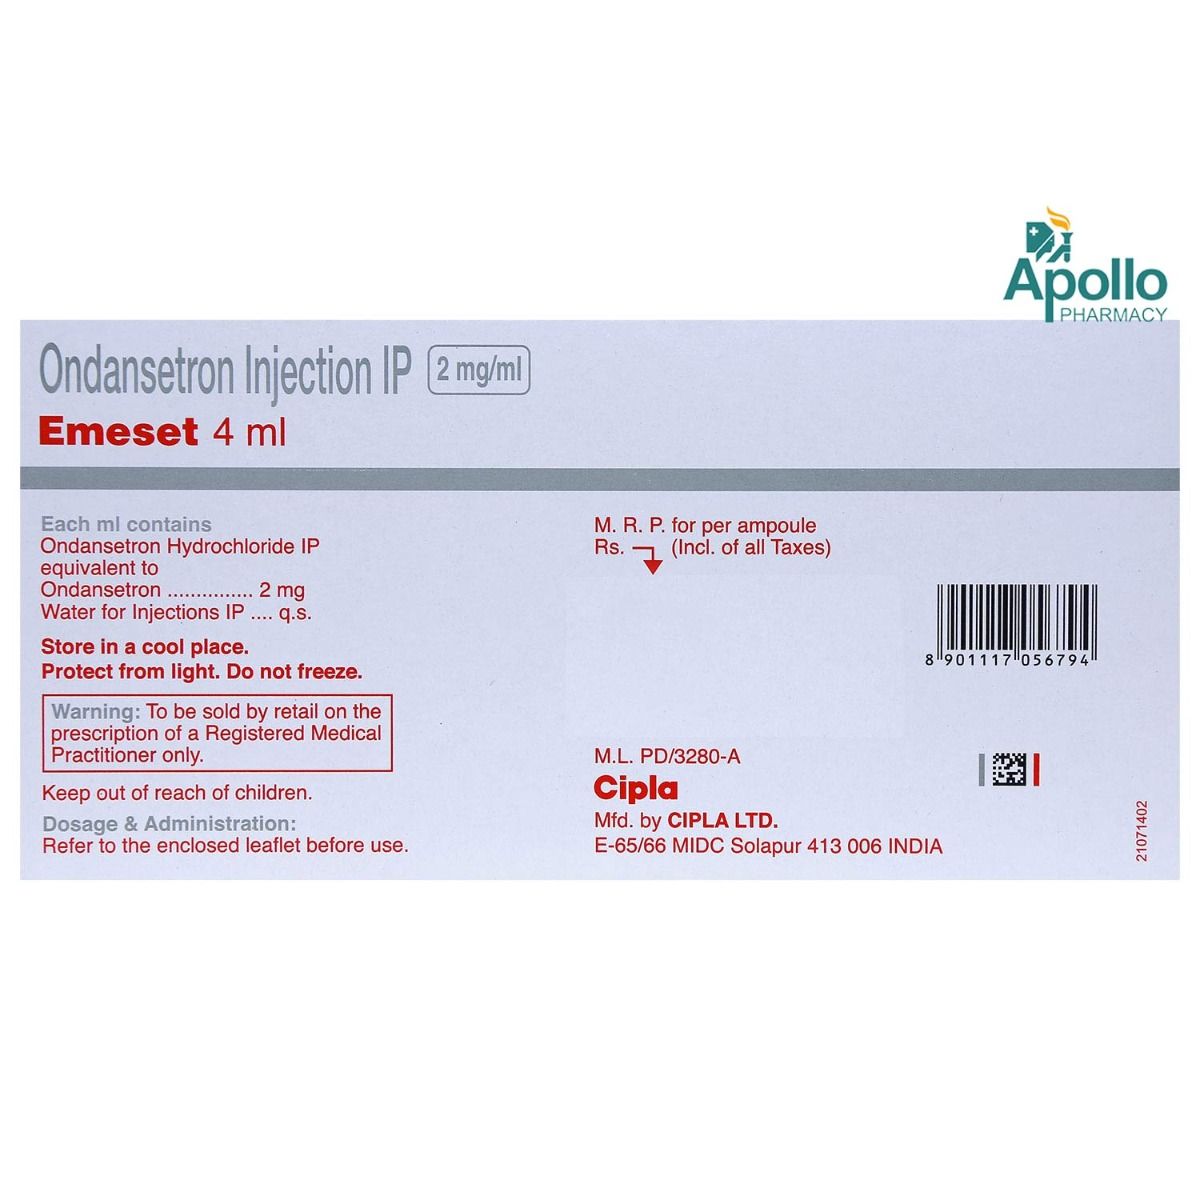 Emeset Injection 10X4 ml, Pack of 10 INJECTIONS